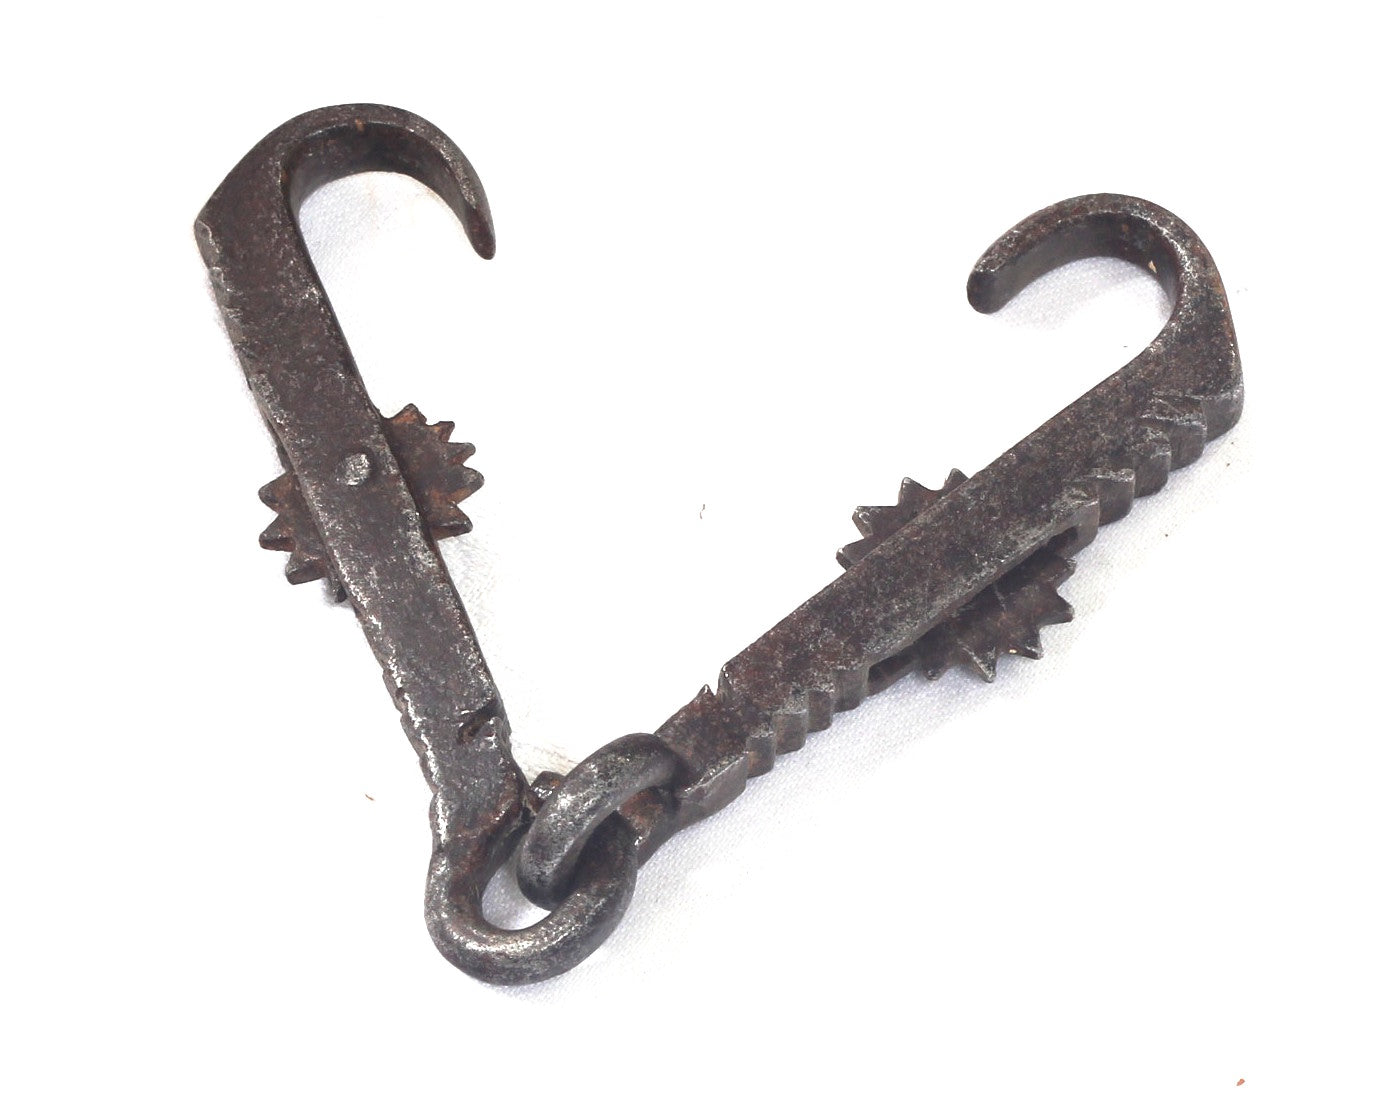 A Steel Spring or Butterfly Bit with Rowels